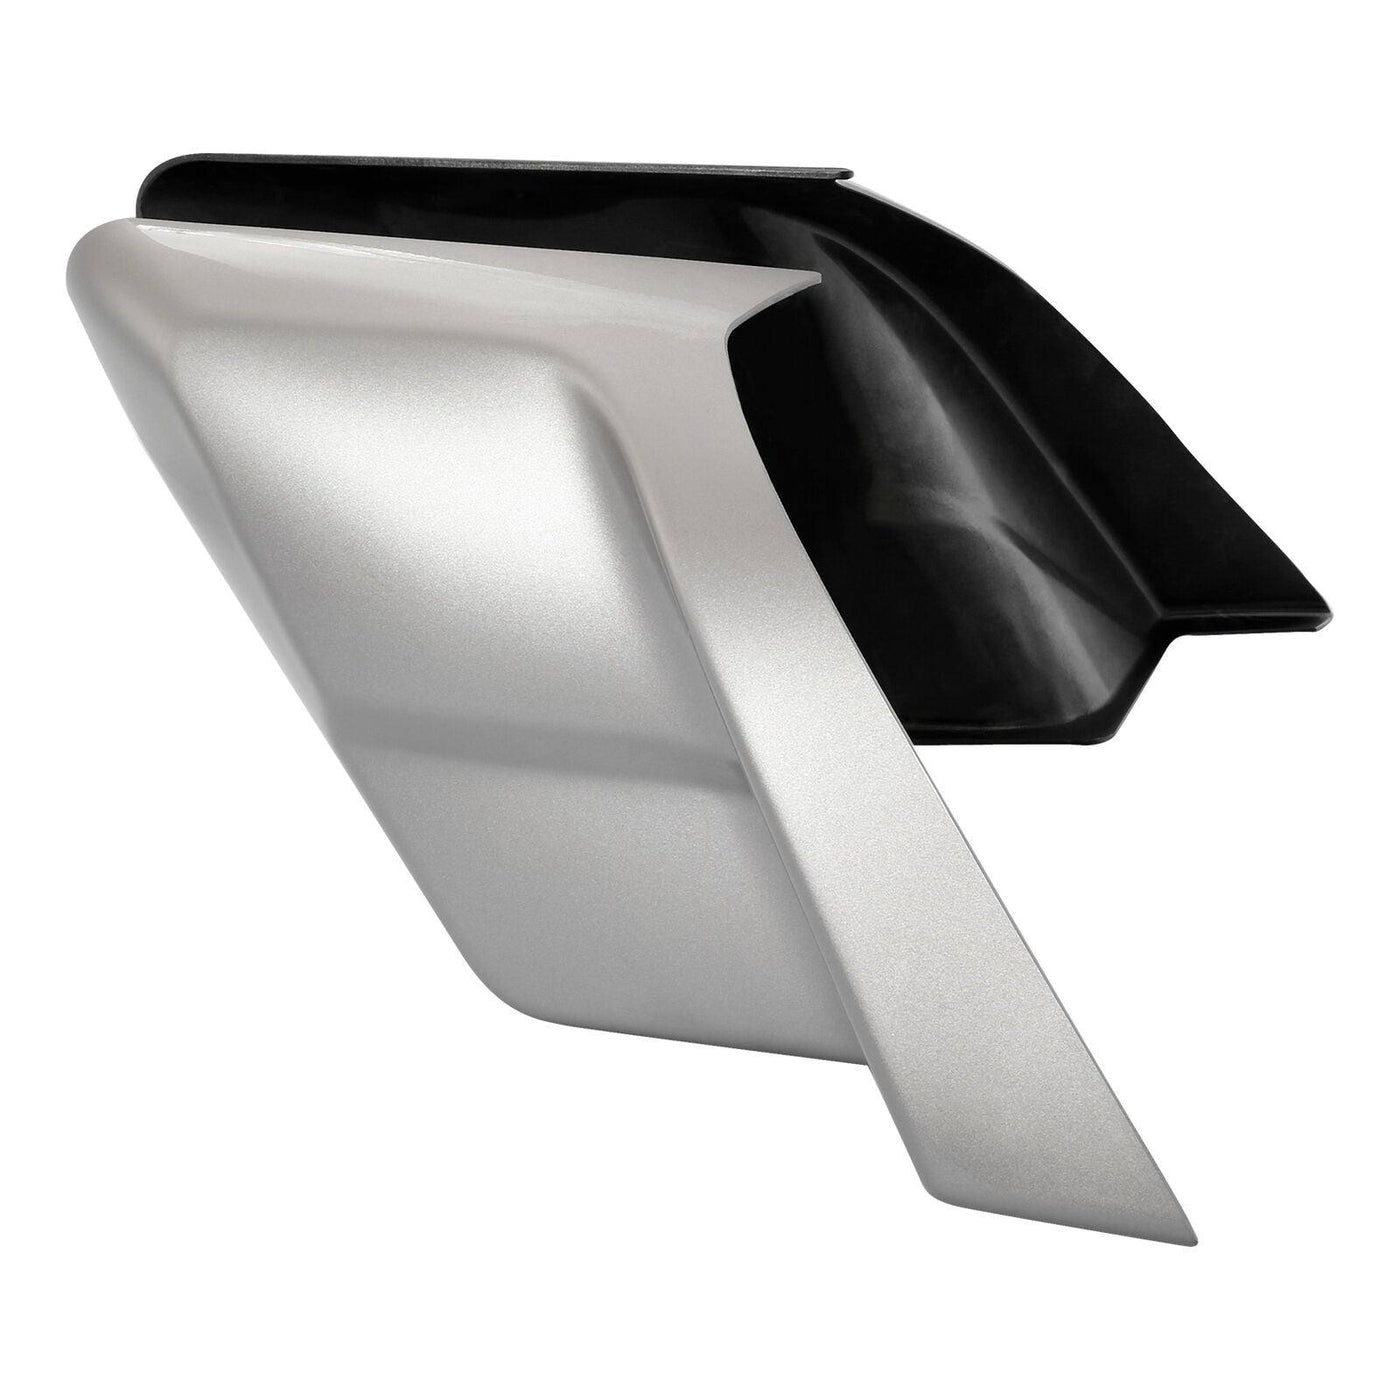 Stretched Side Cover Panel Fit For Harley Touring Road Glide 14+ Silver Fortune - Moto Life Products